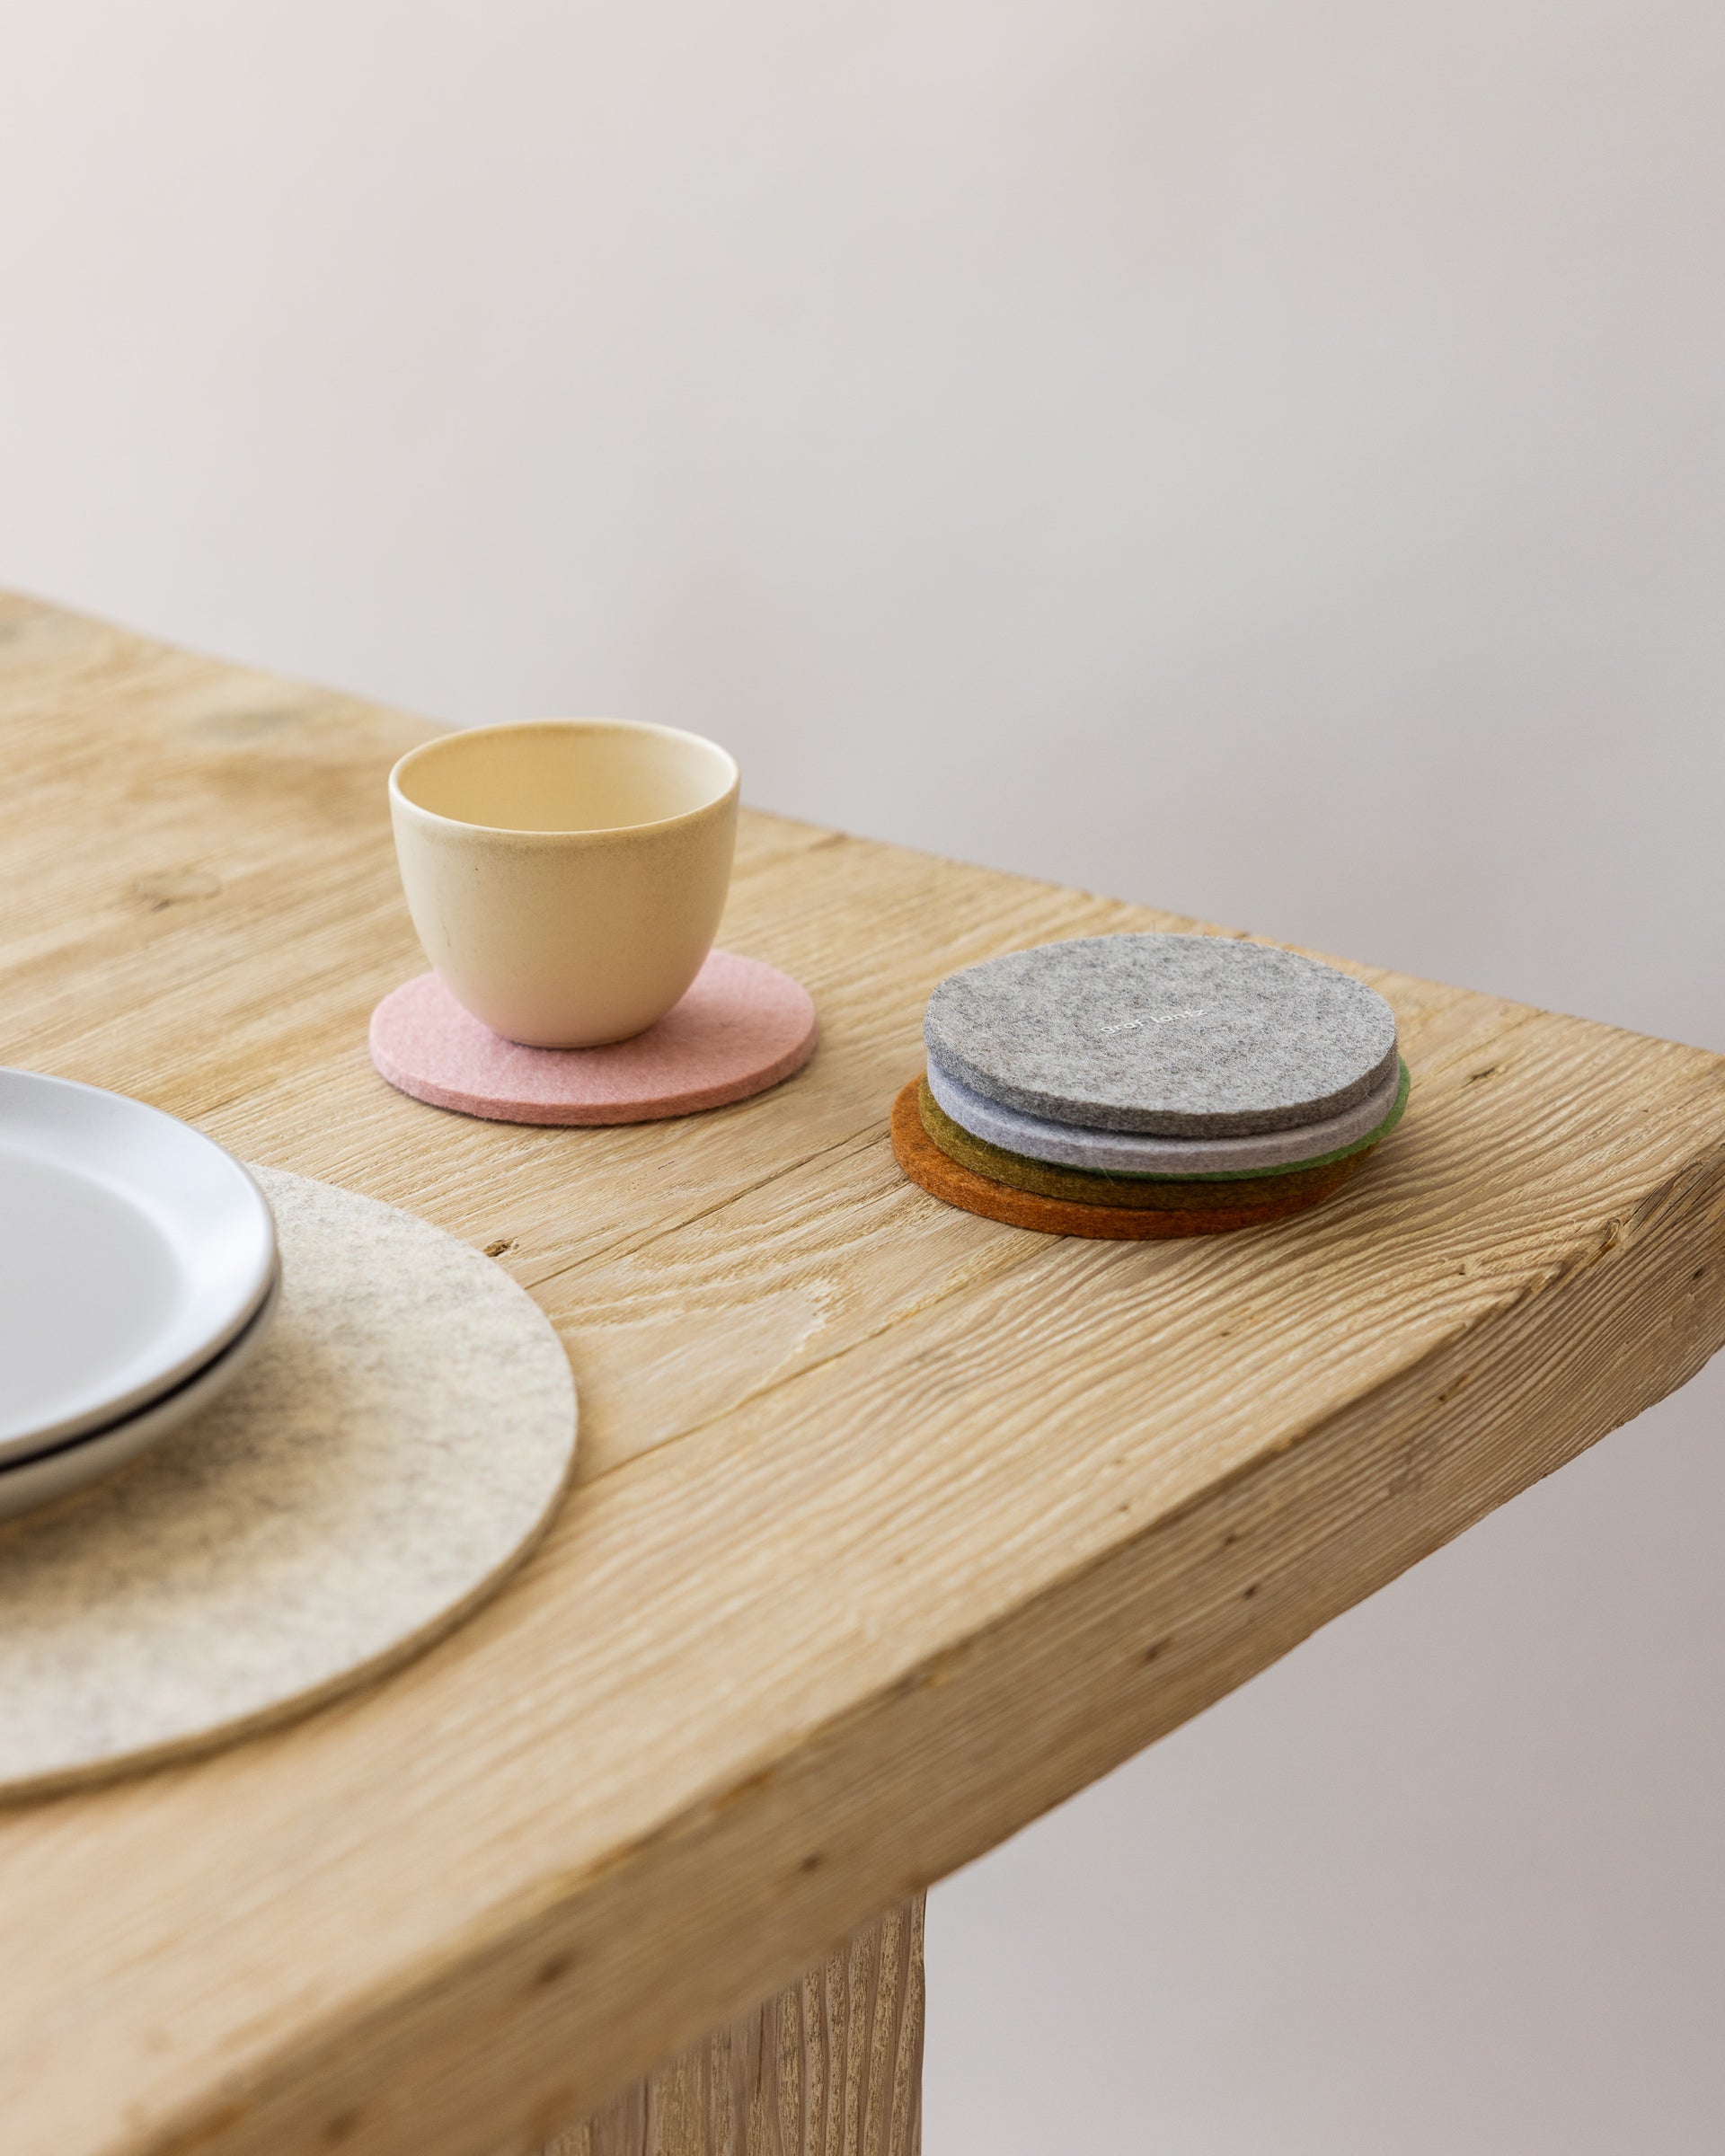 Stack of four round felt coasters in different colors on a wooden table next to a white placemat, white plates, and a small beige mug